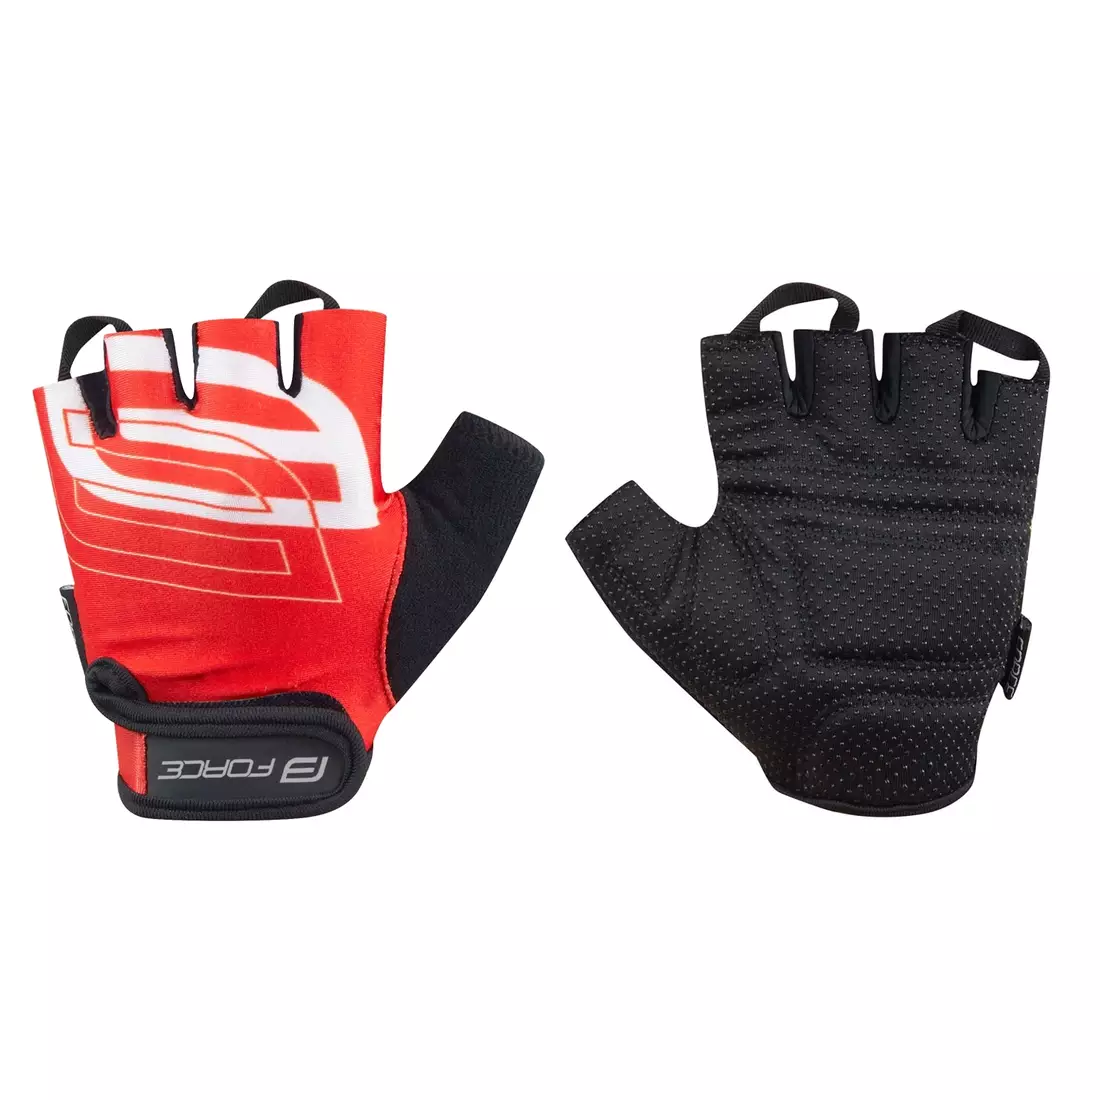 FORCE bicycle gloves sport red 905571-S